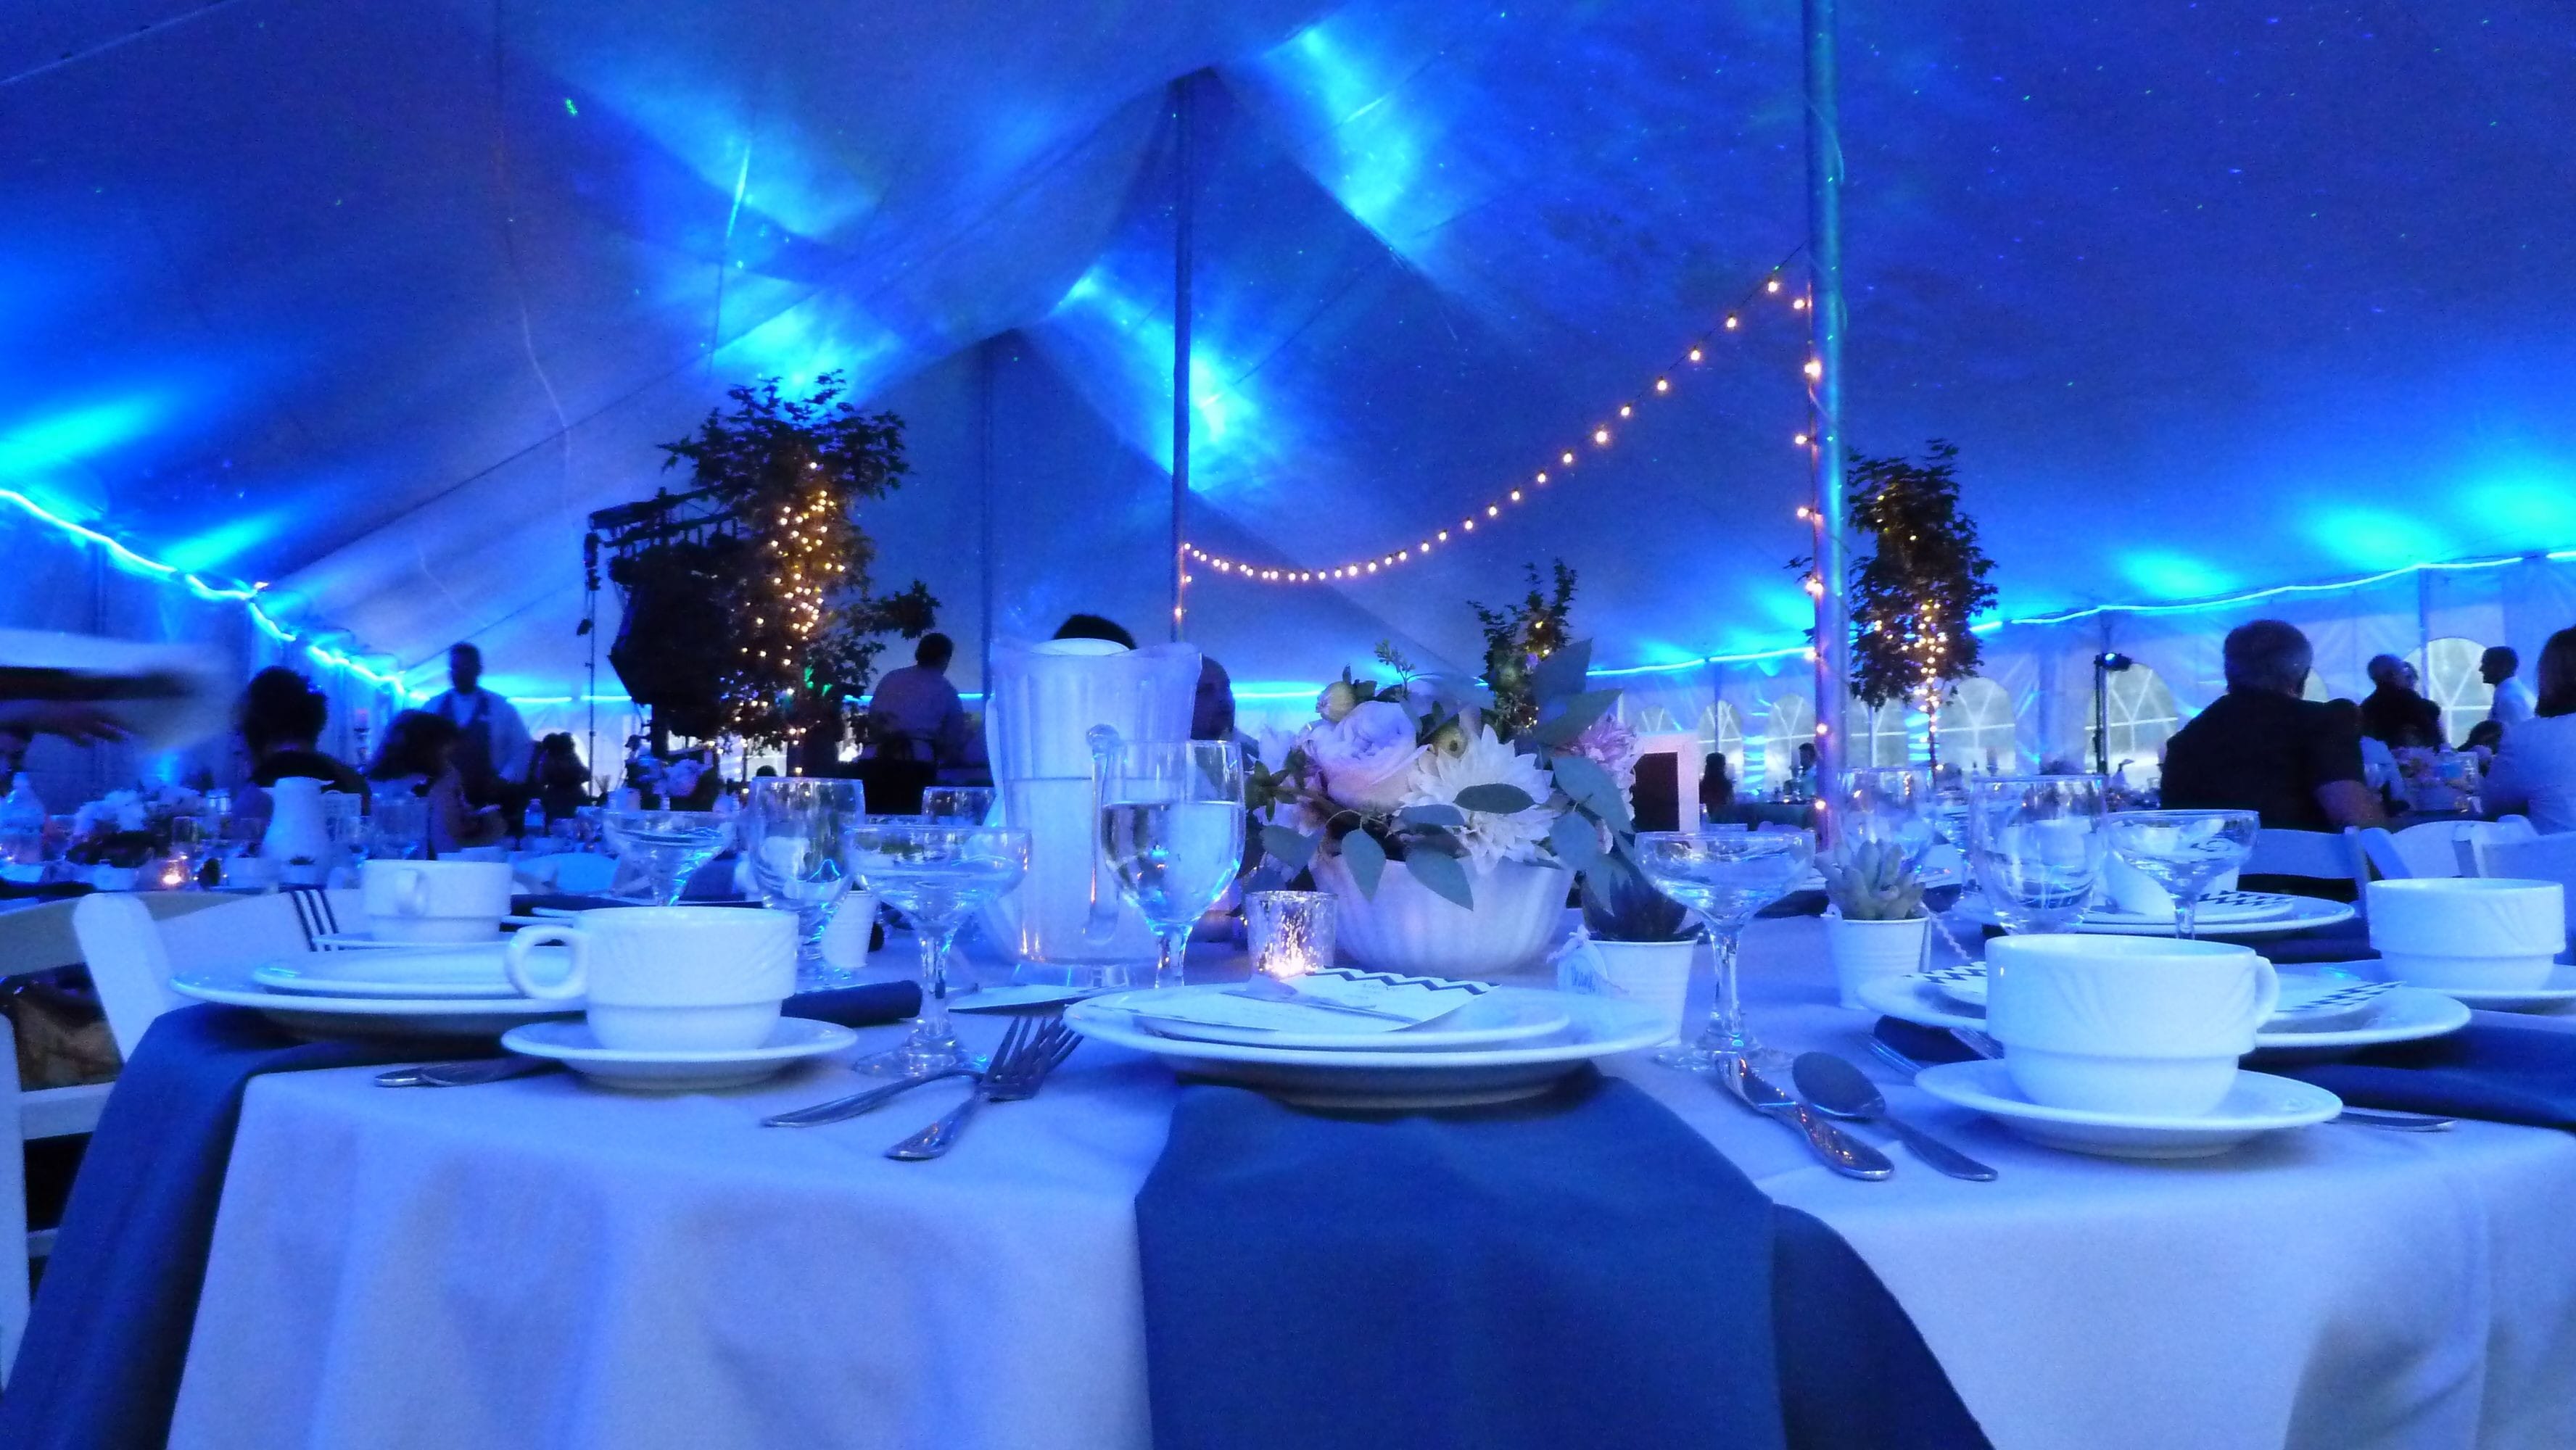 Tent wedding lighting. Up lighting in blue with stars and Northern Lights dancing on the ceiling.